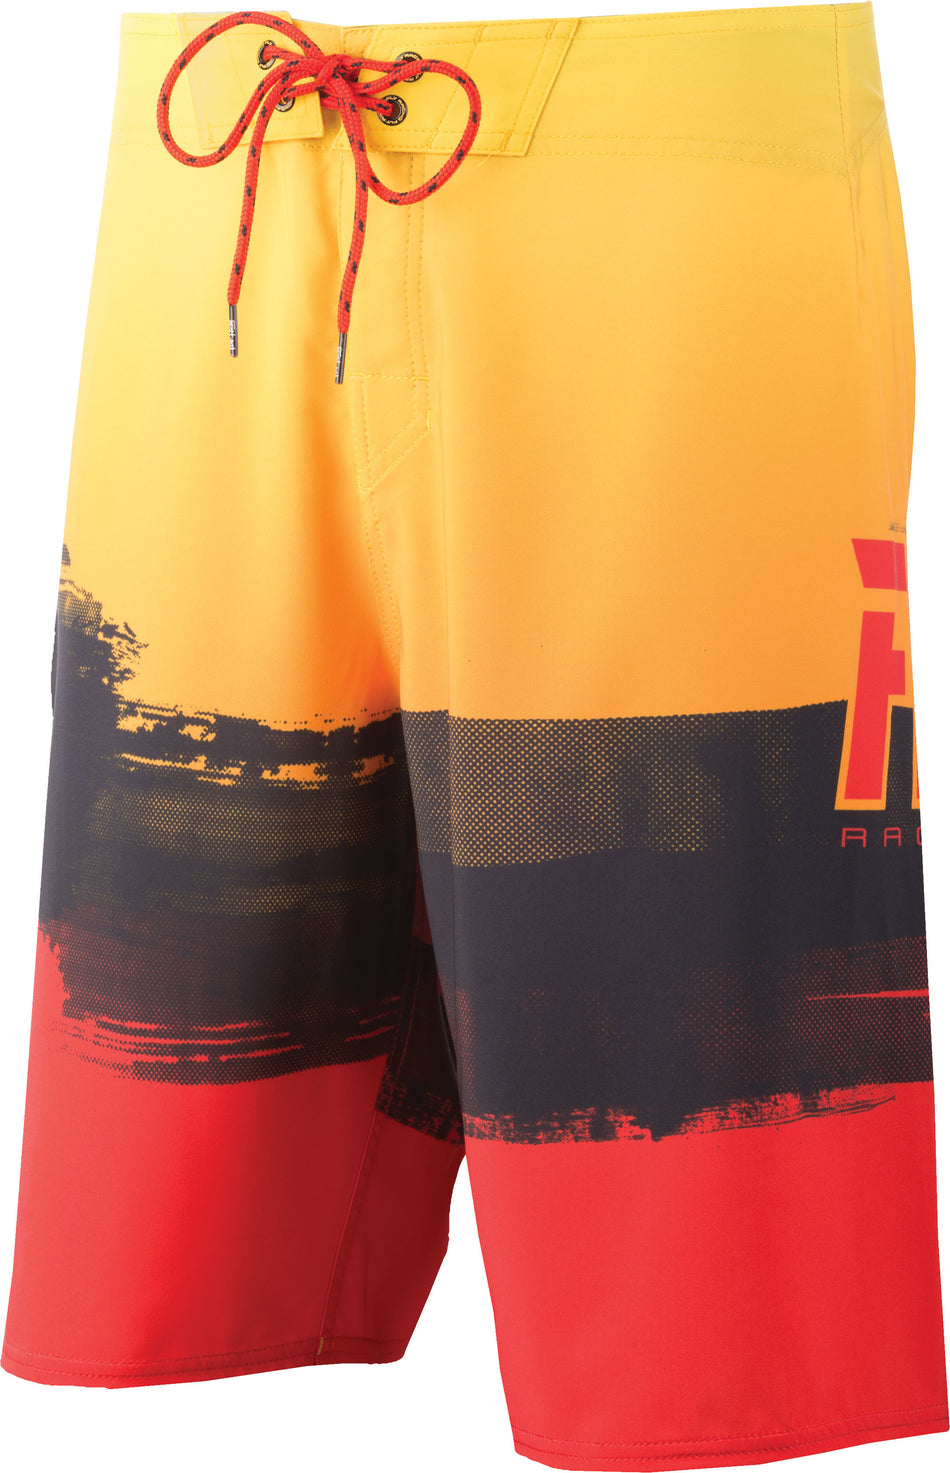 FLY RACING Fly Paint Slinger Boardshorts Red/Yellow Sz 32 353-19432